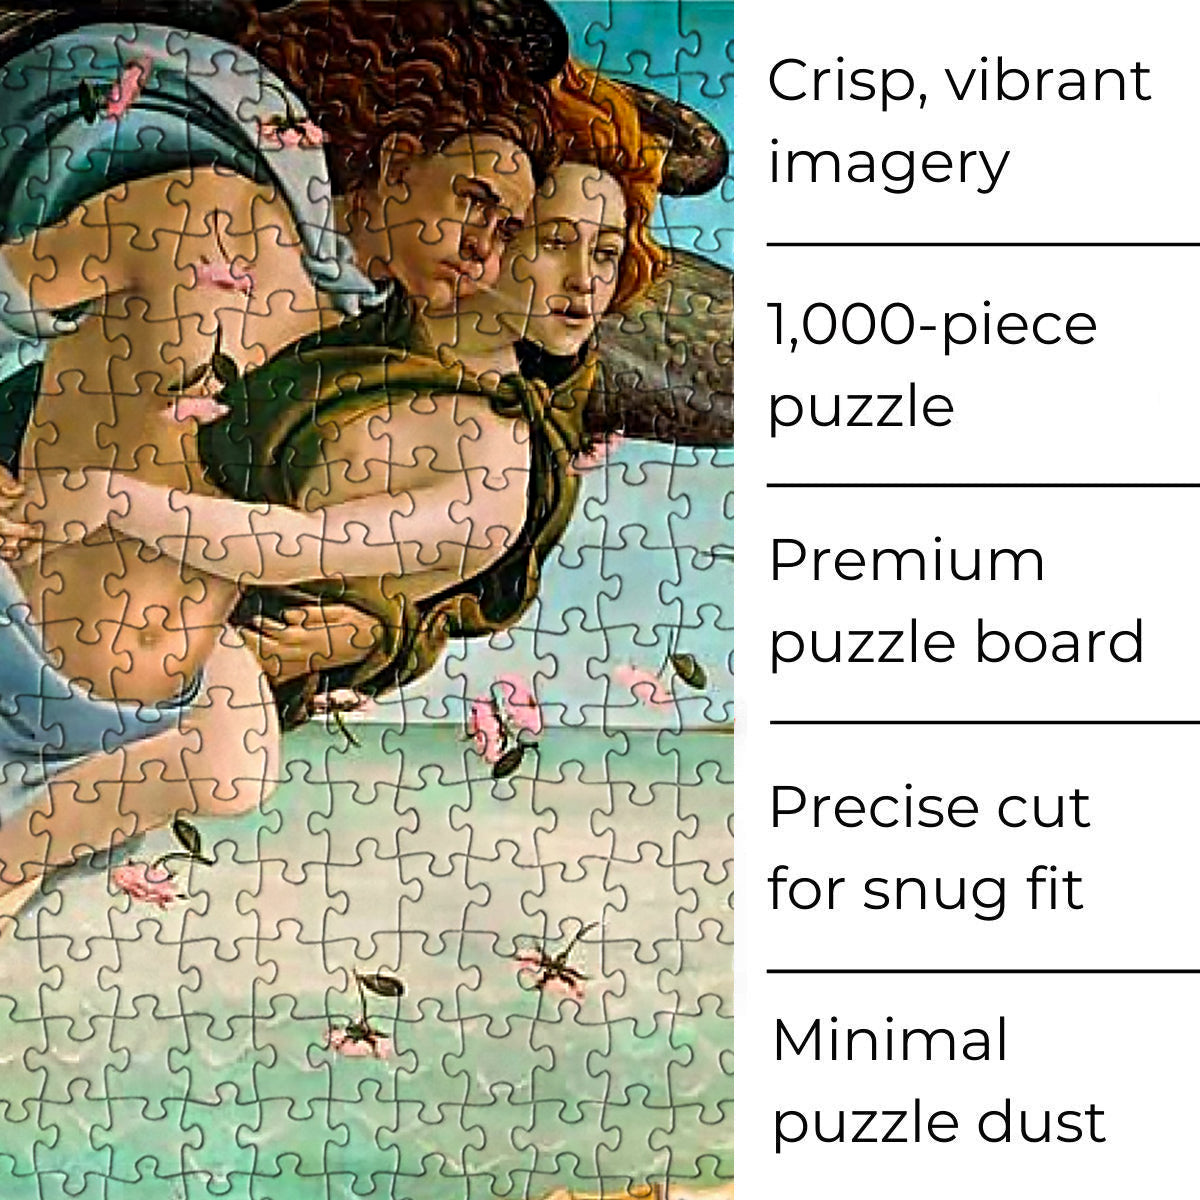 Crafted from the highest resolution images ever taken of Sandro Botticelli's The Birth of Venus masterpiece, the Rest In Pieces Fine Art Puzzle will provide you with hours of screen-free entertainment and tranquility.